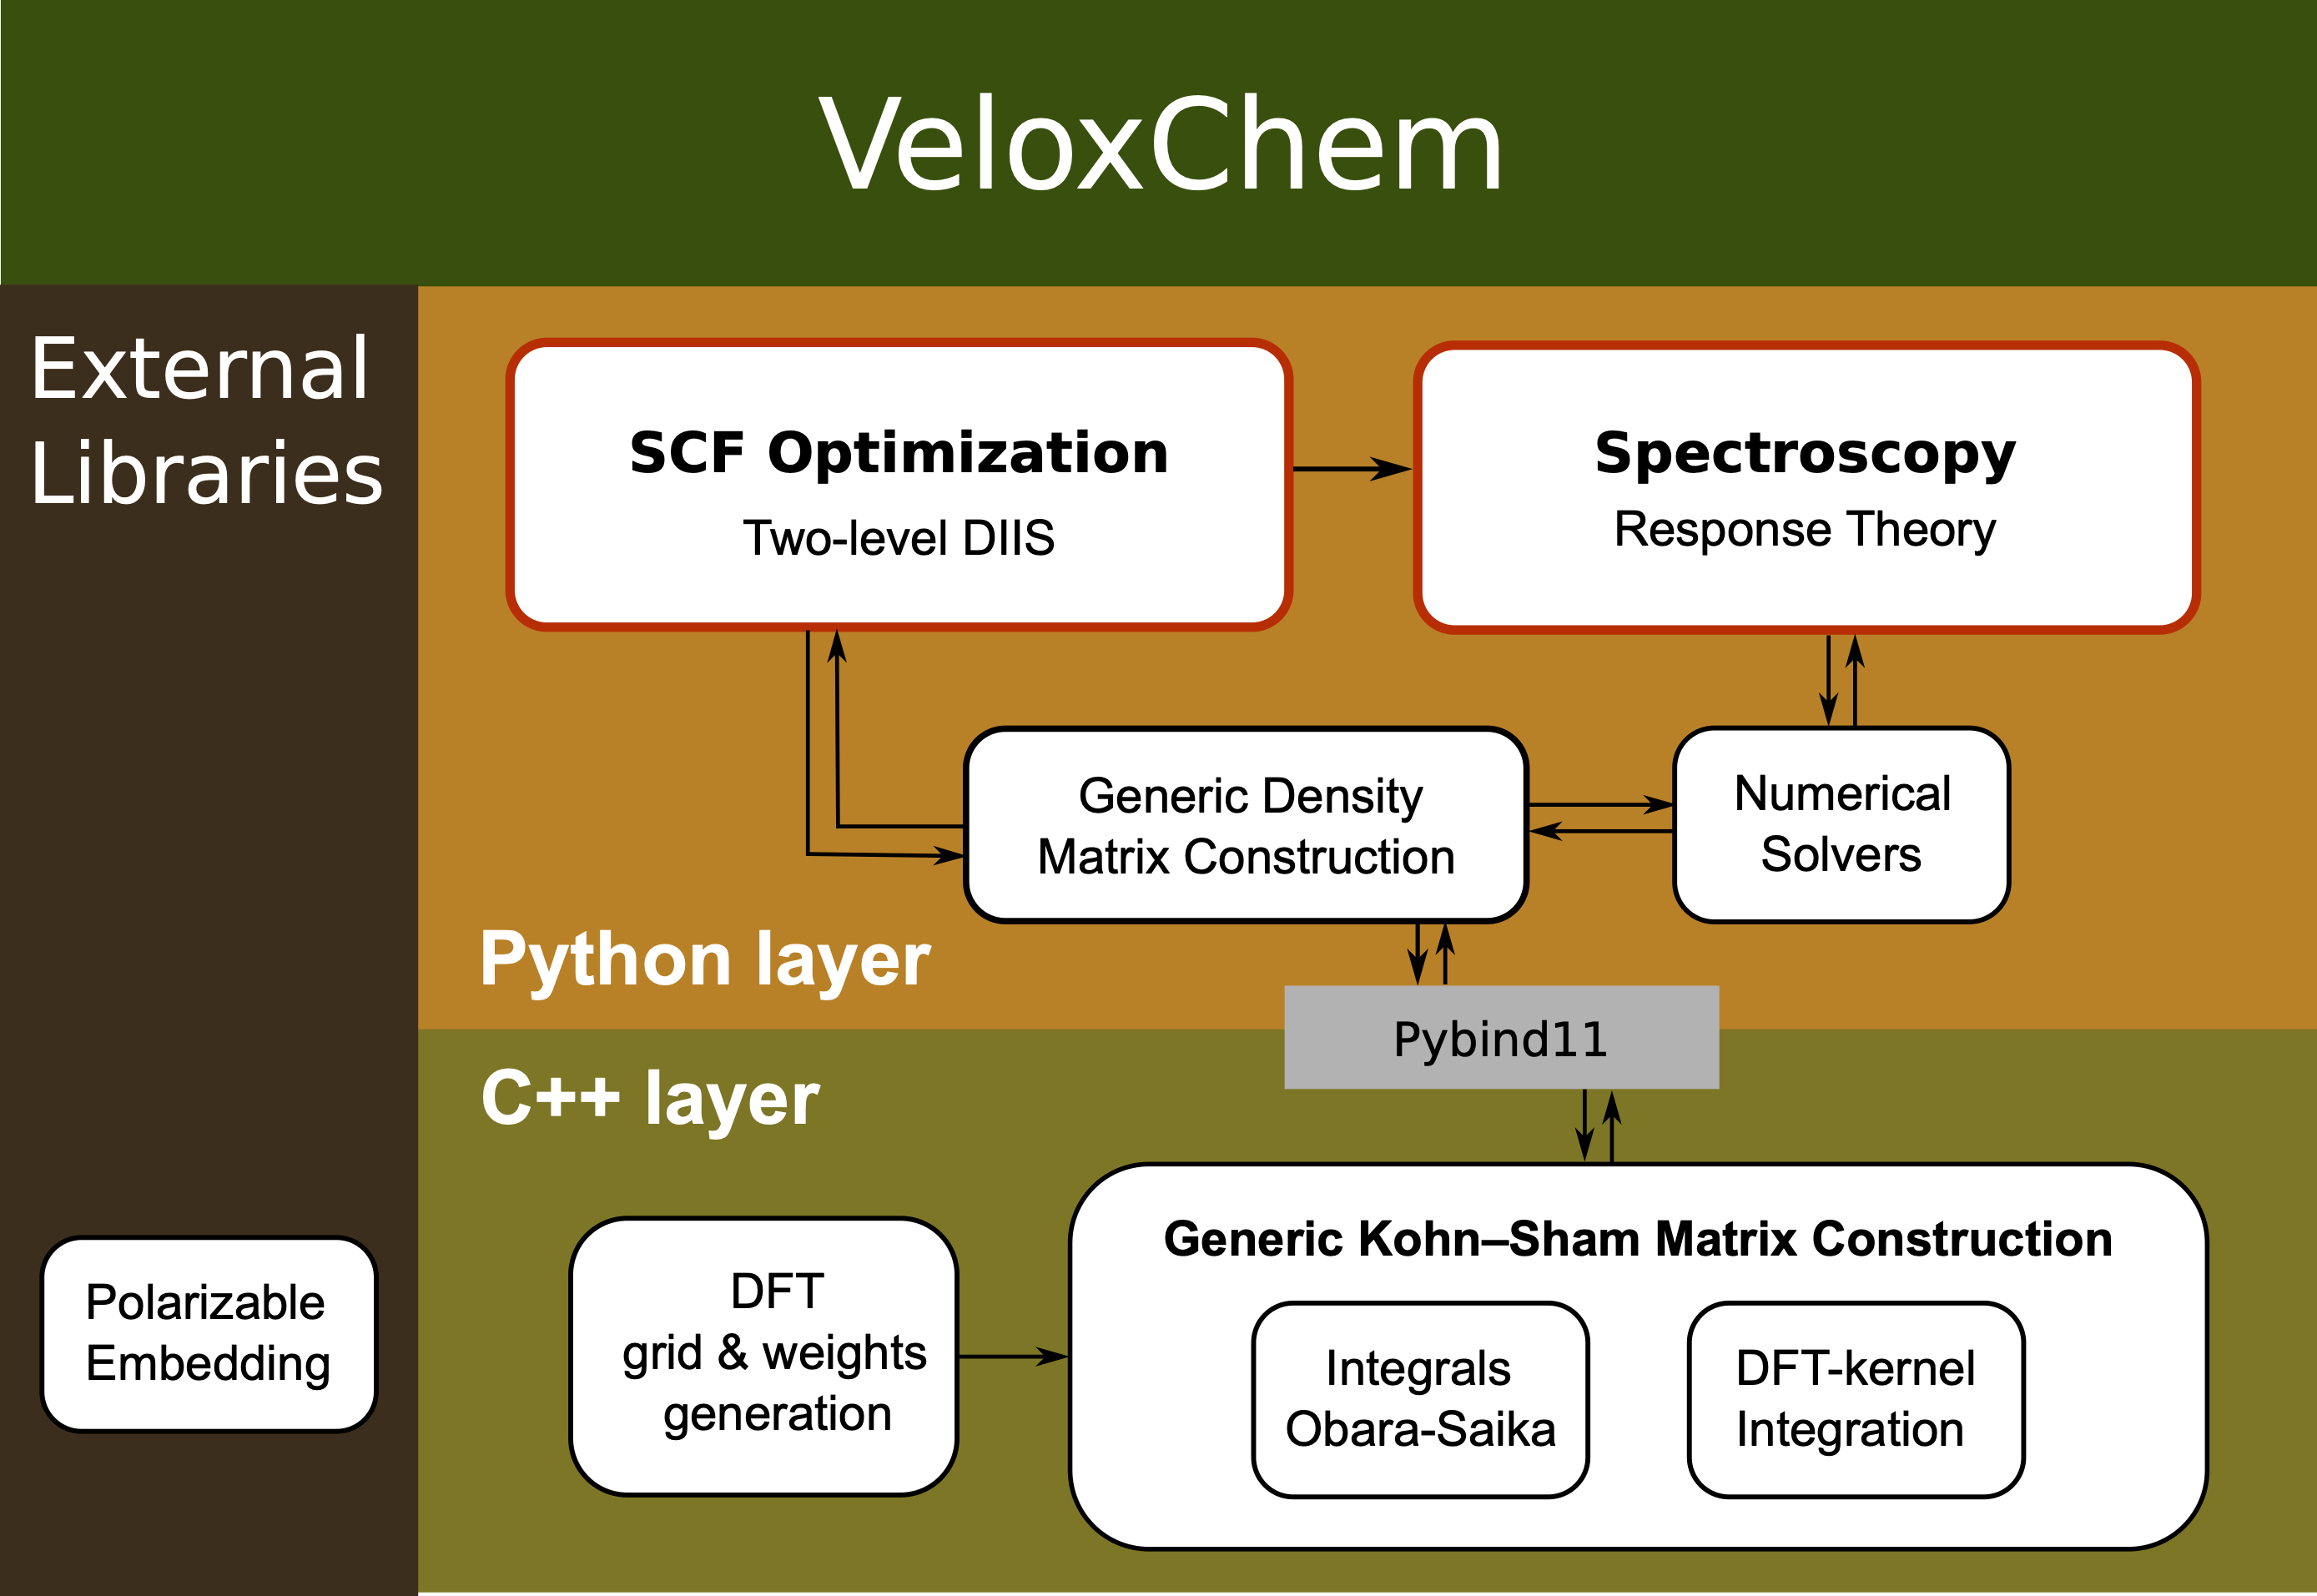 Code structure of veloxchem.